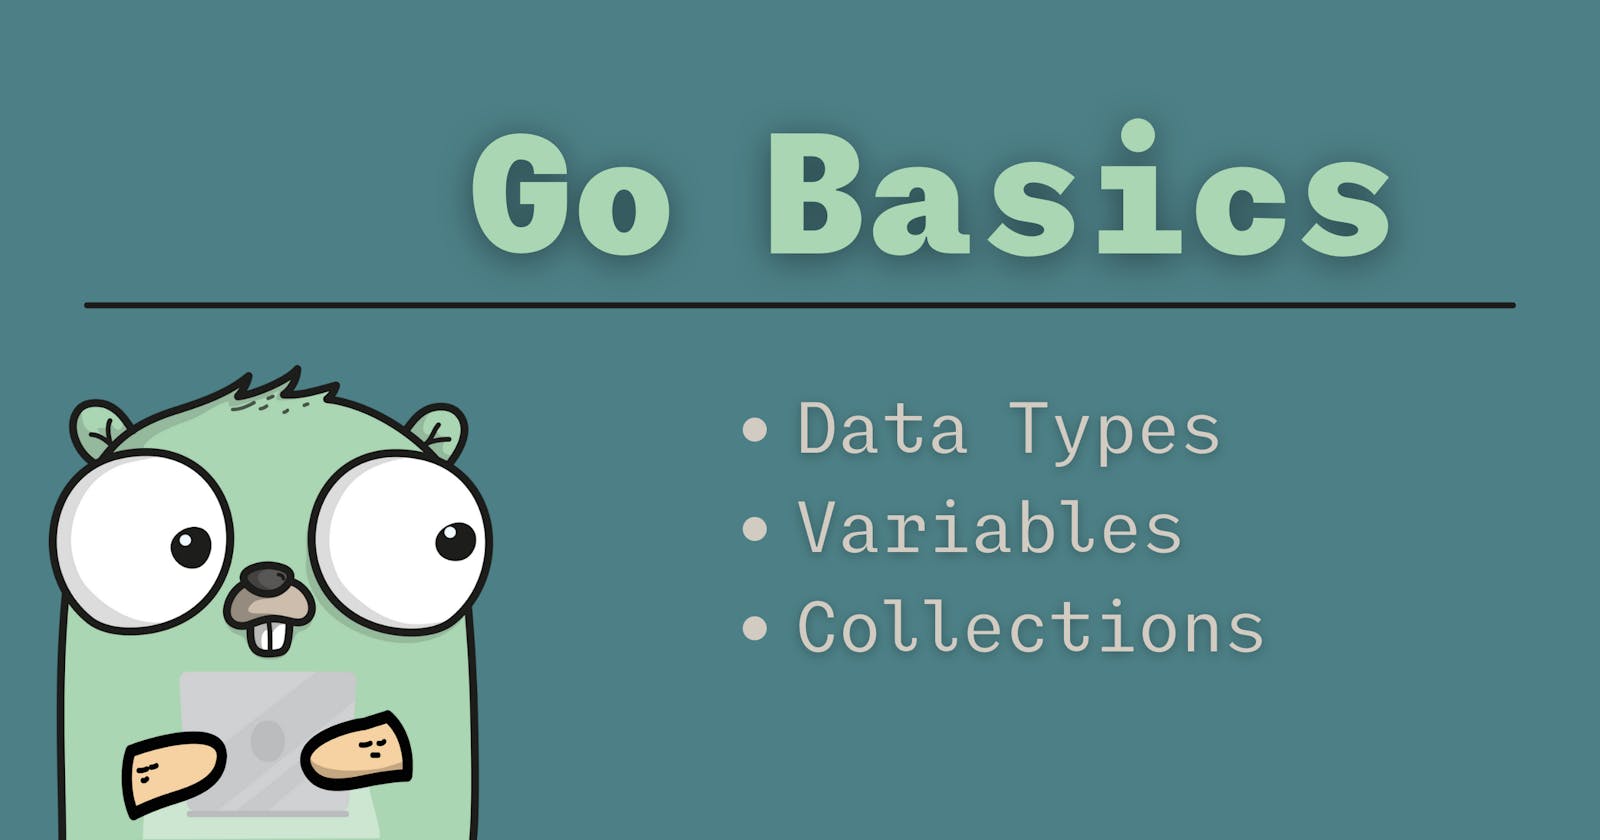 Go Basics; Data Types, Variables, and Collections